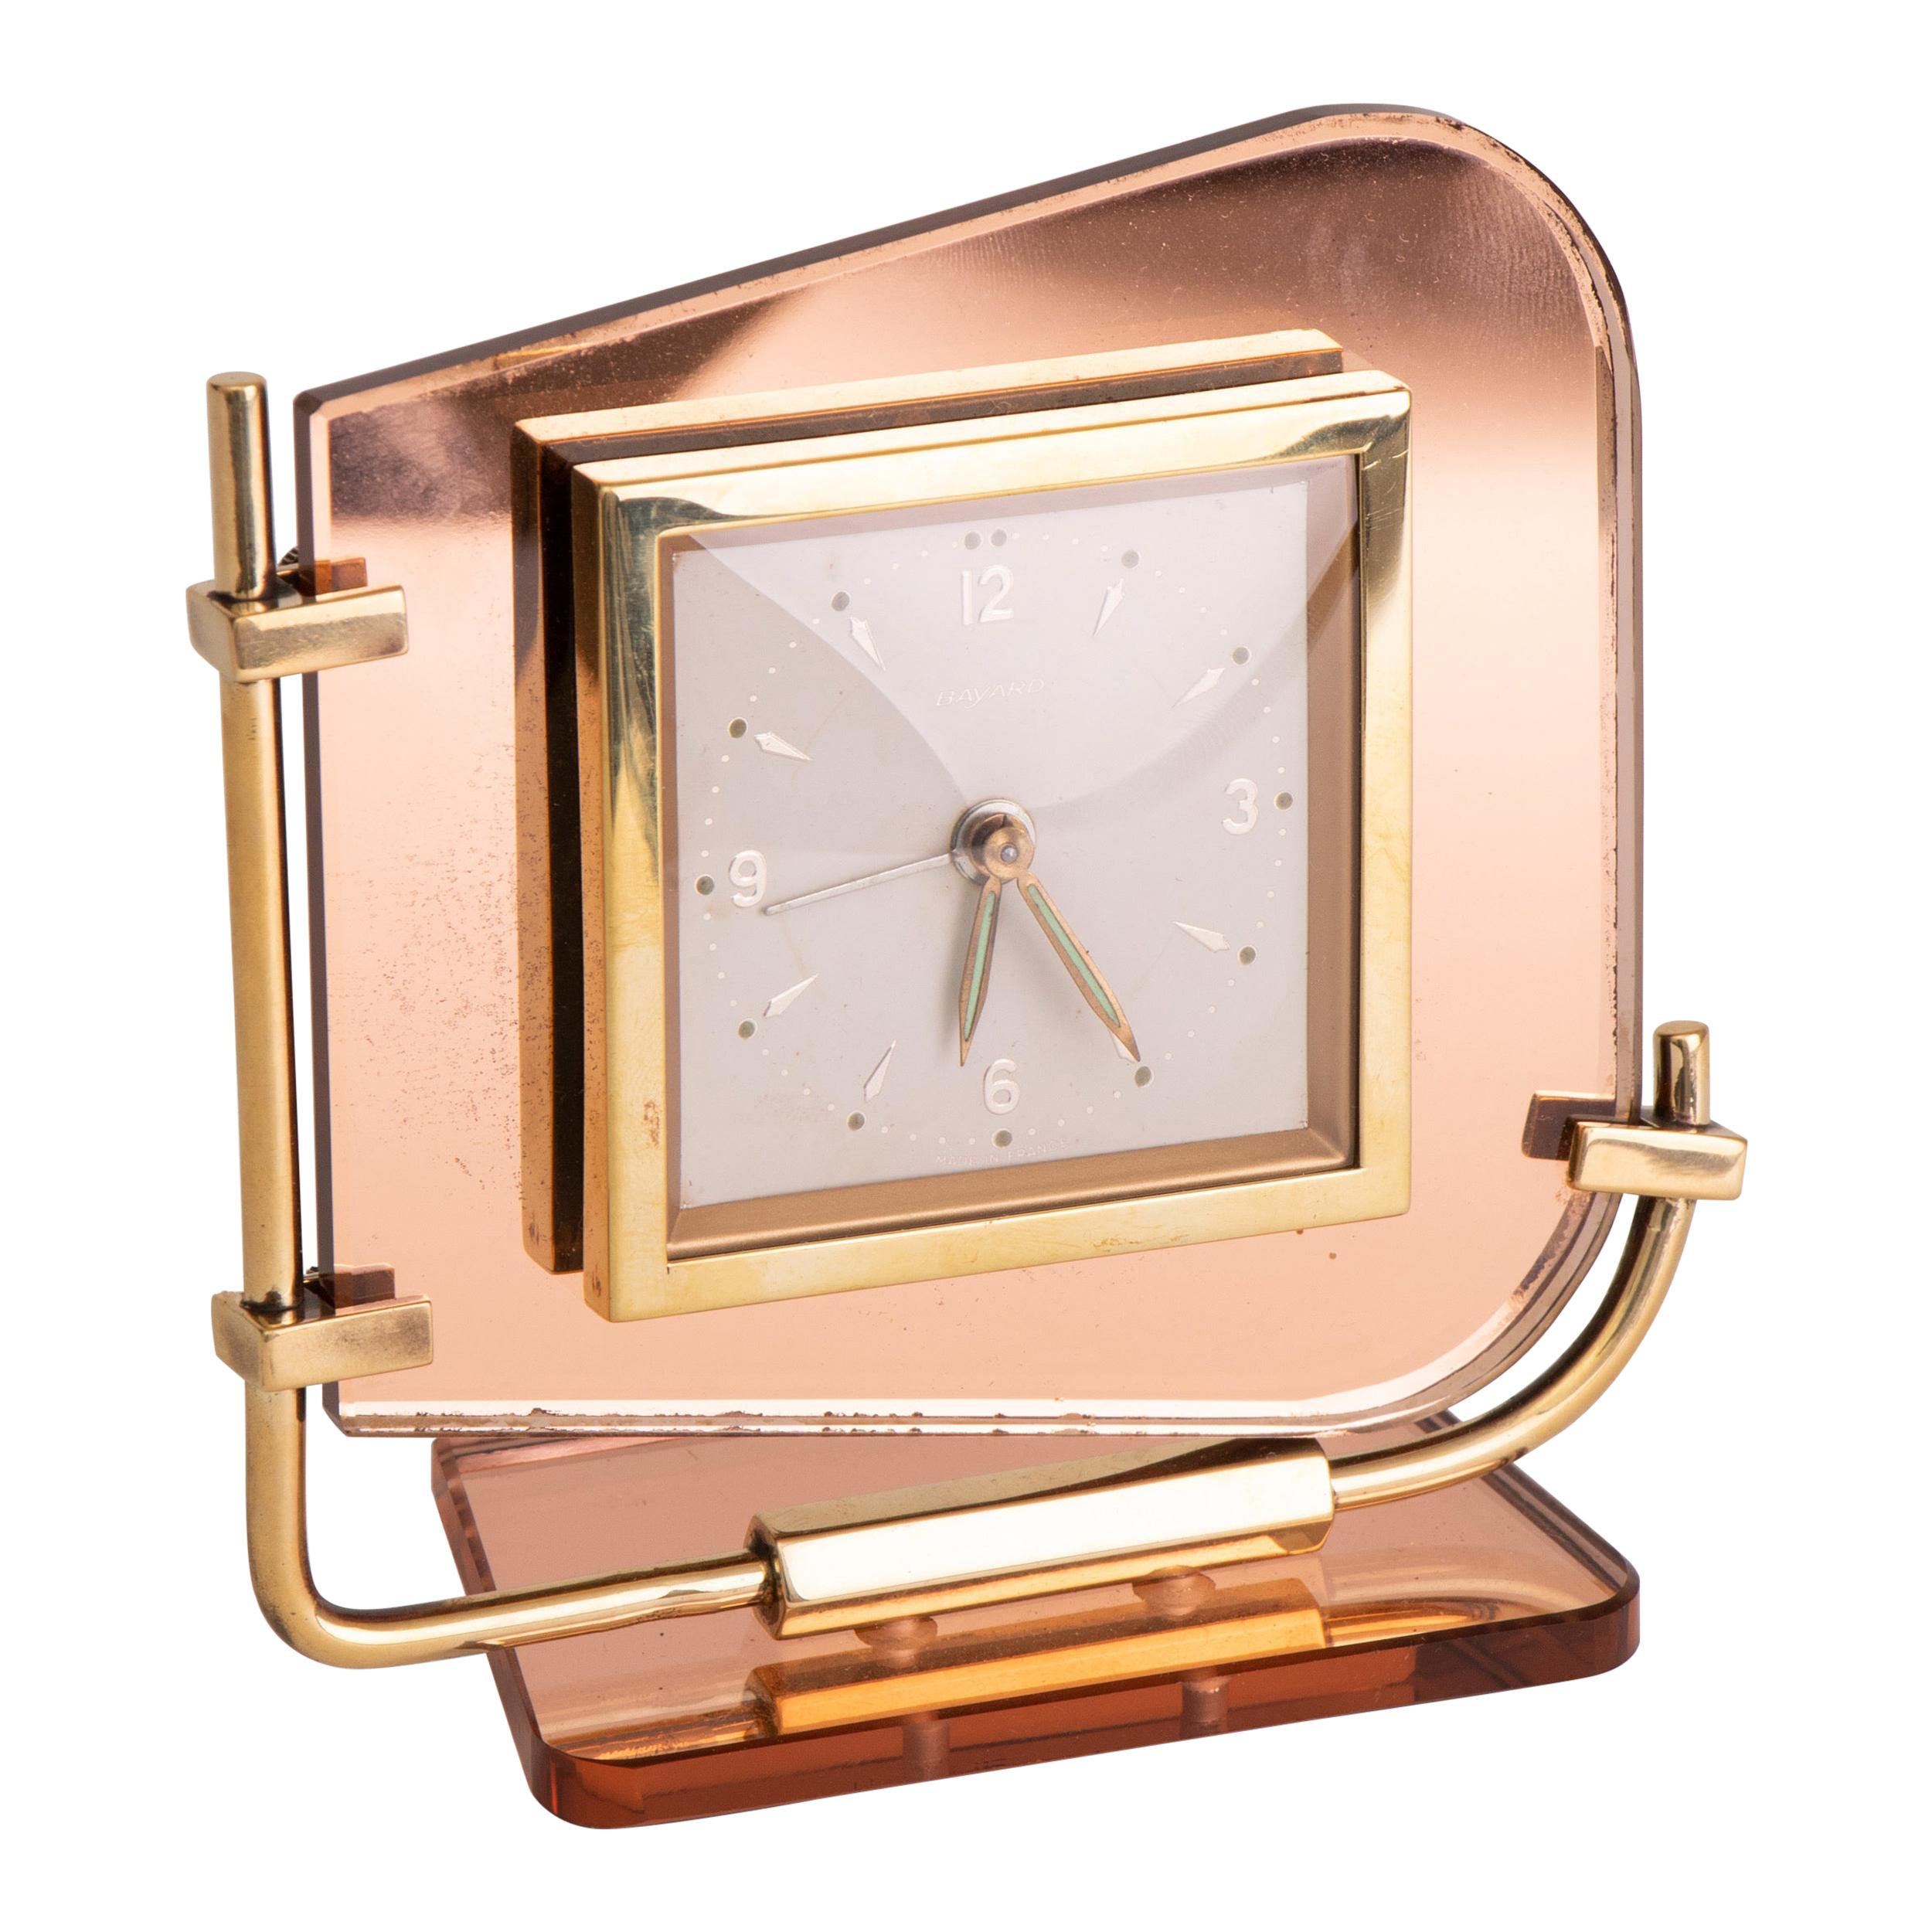 French Art Deco Clock with Peach Mirrored Glass by Bayard